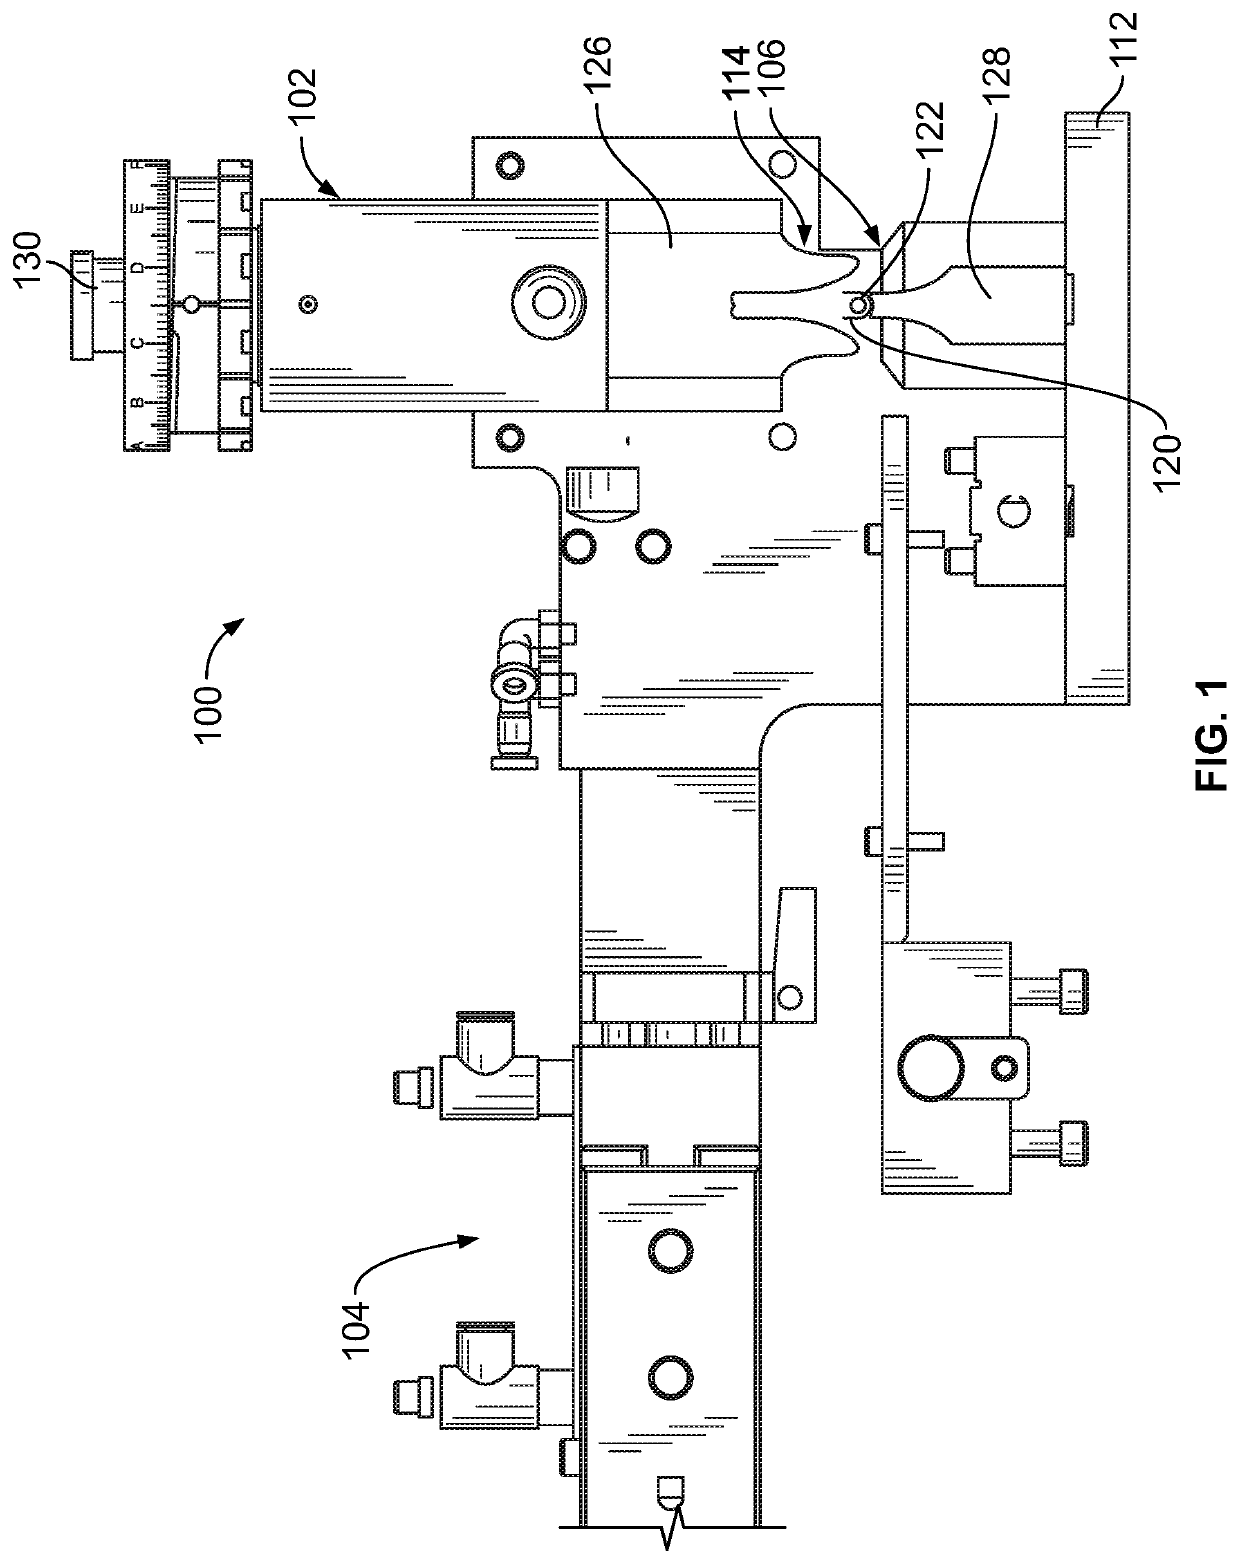 Crimp tooling having guide surfaces